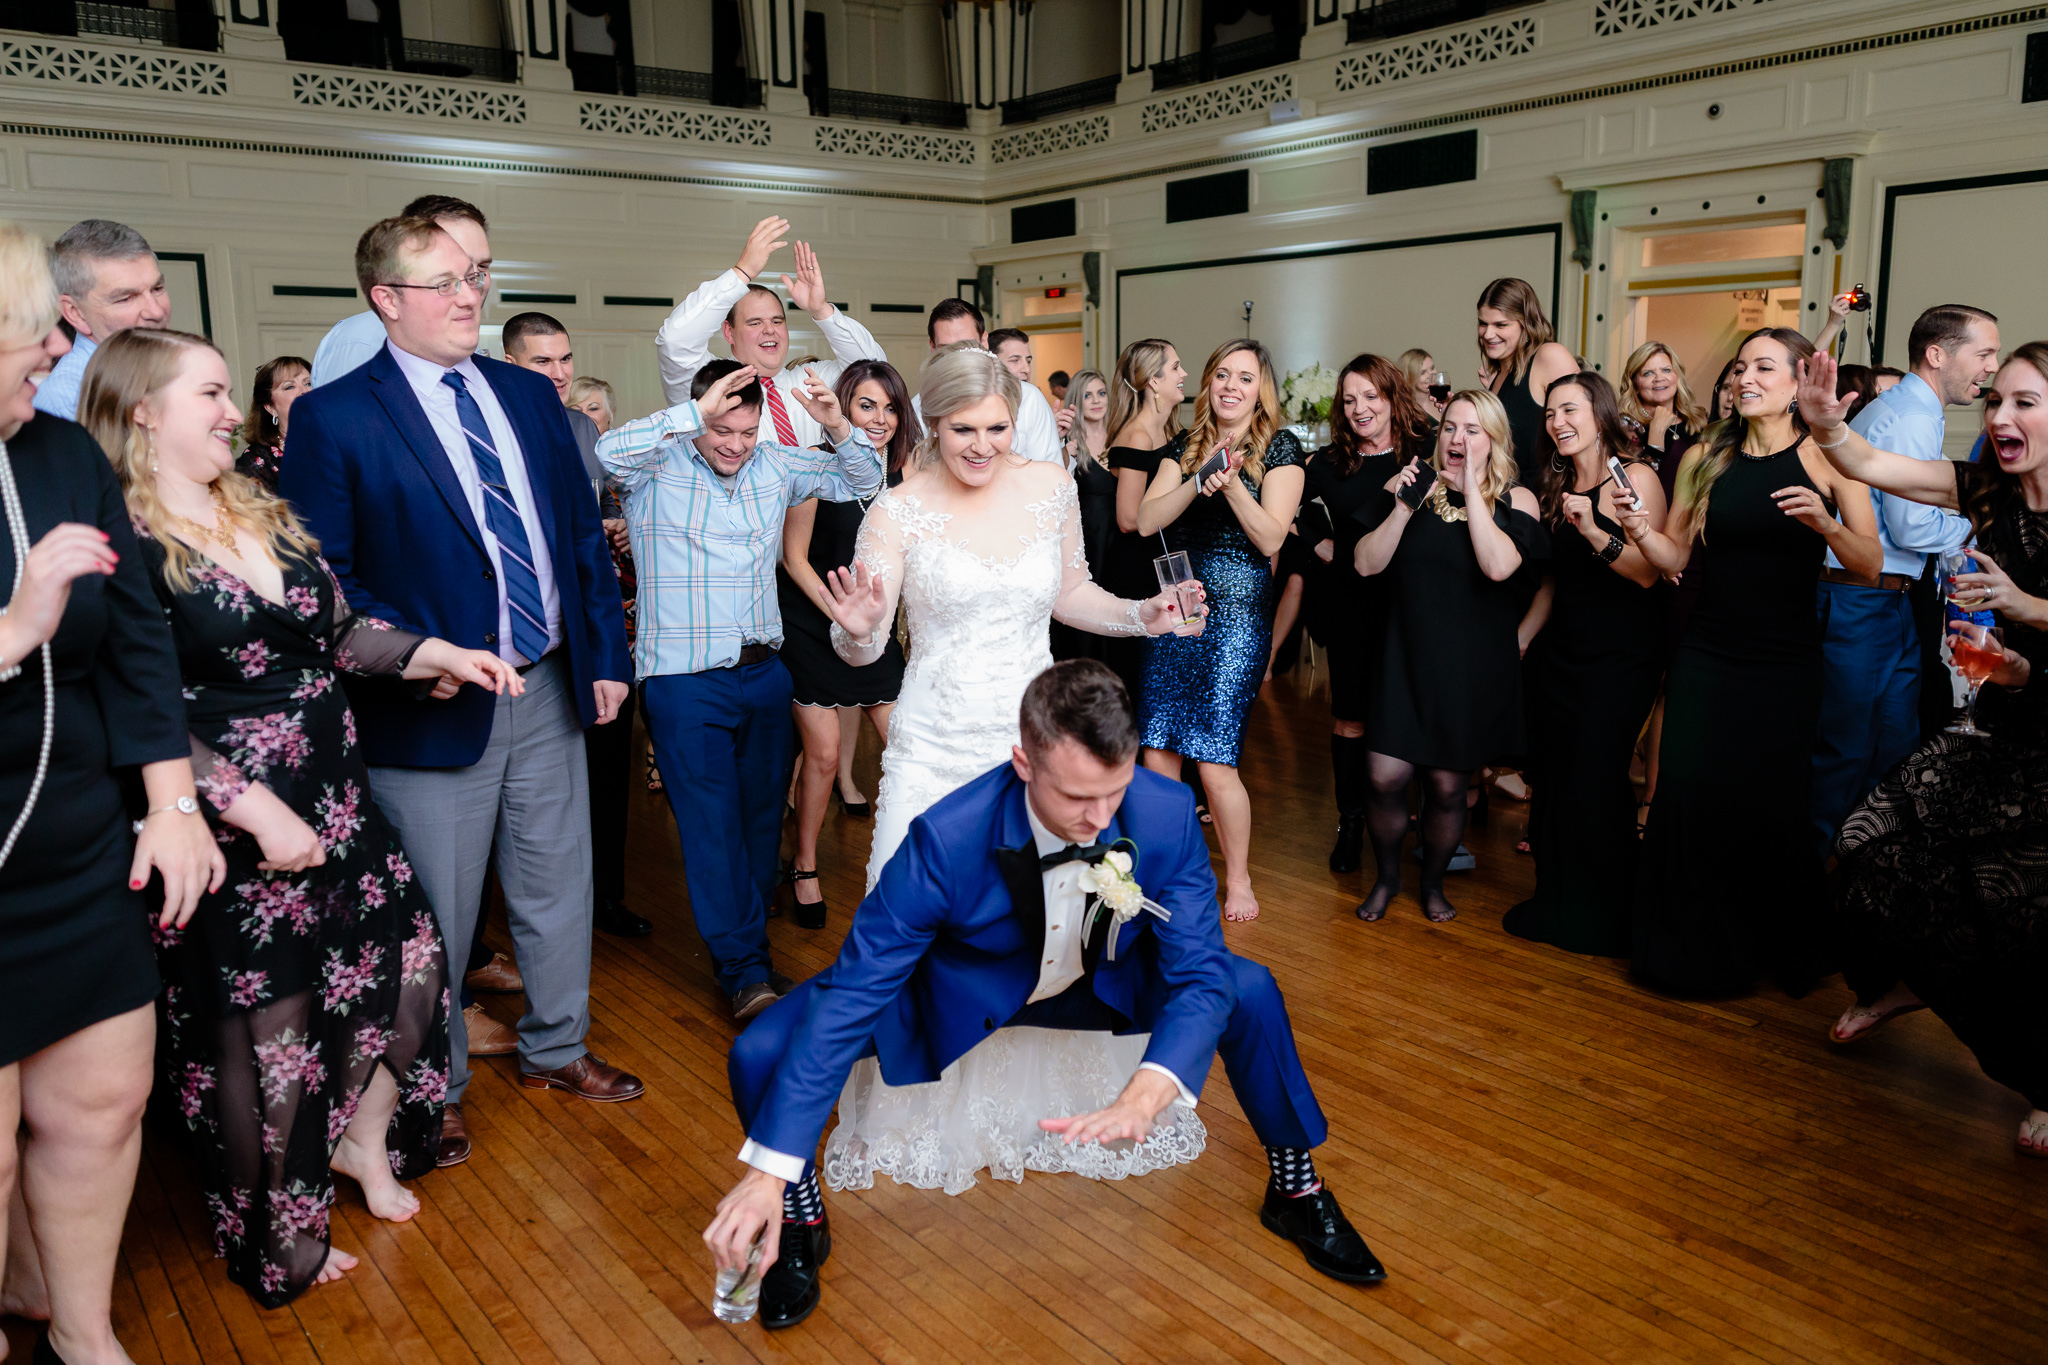 Guests cheer as newlyweds dance at Soldiers & Sailors Memorial Hall